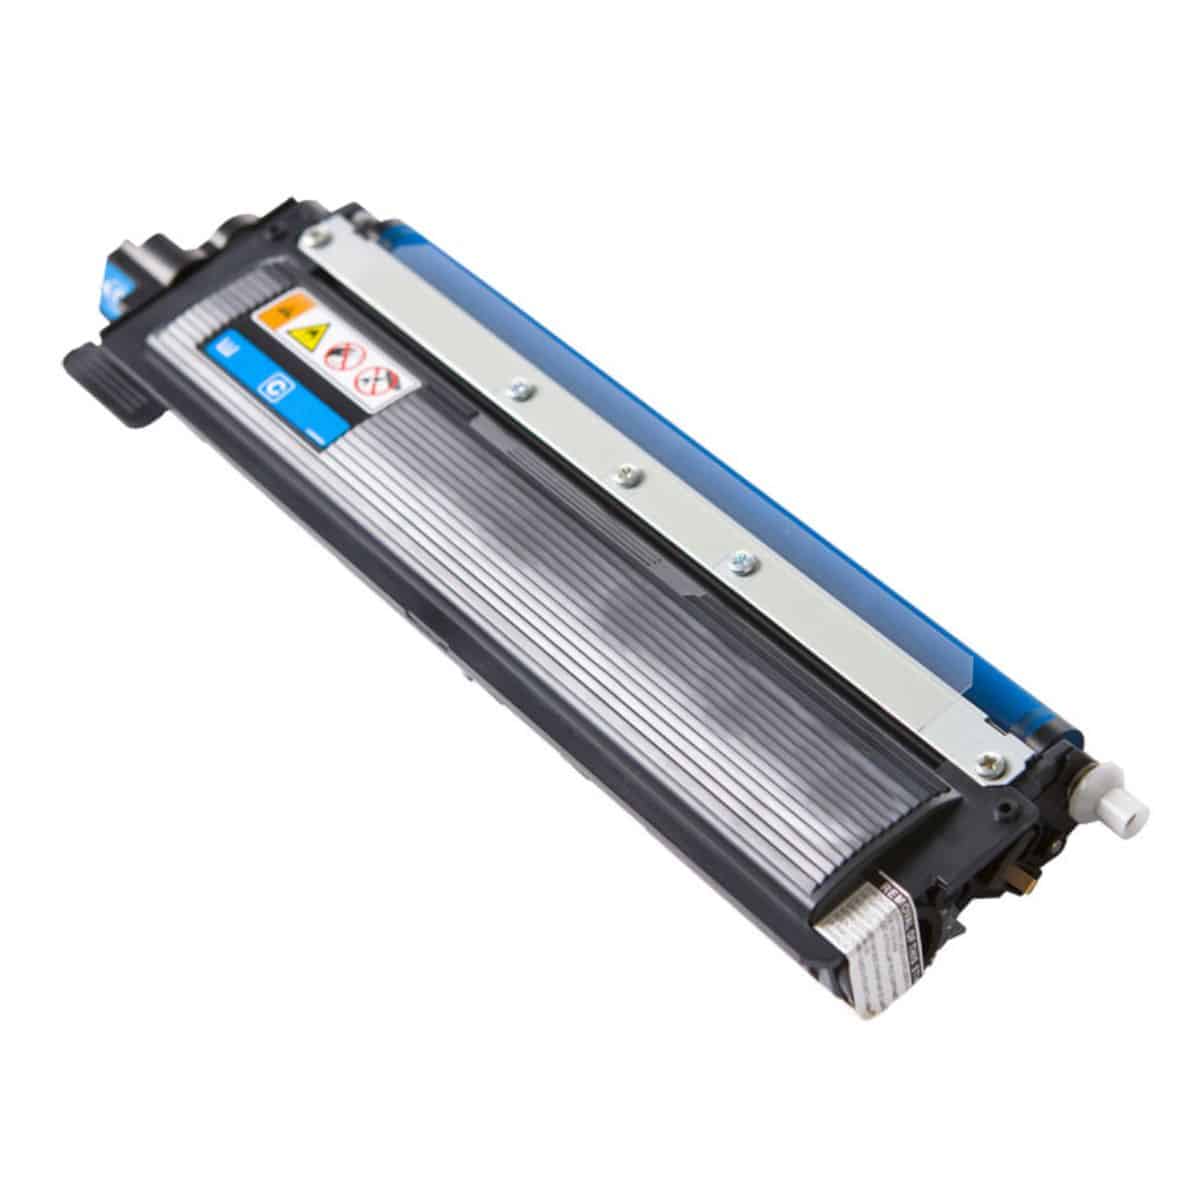 TN-210 / 230 C Toner laser compatible Brother - Cyan